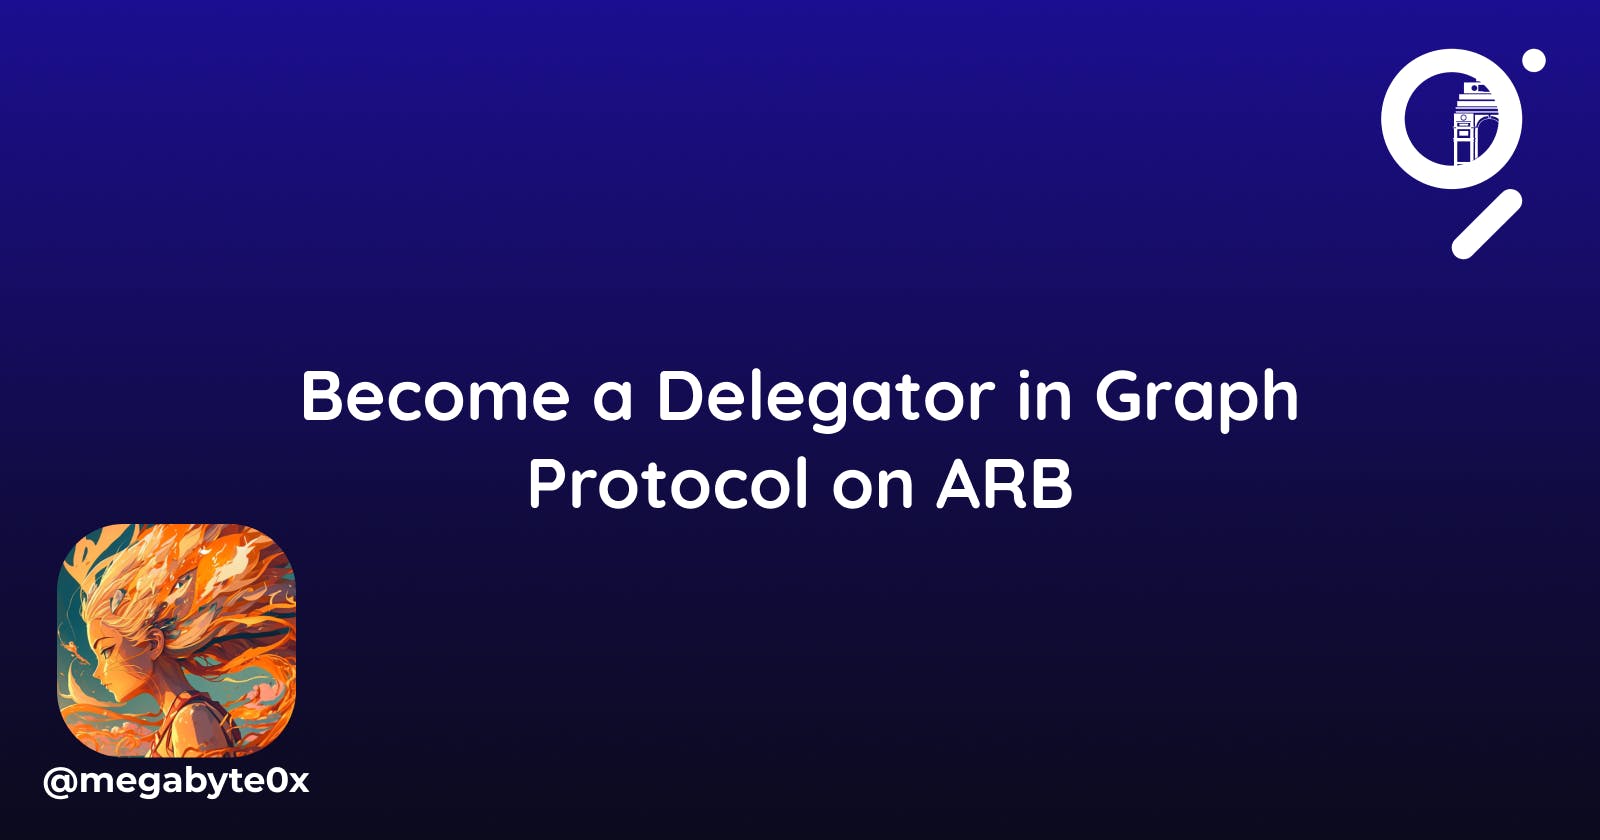 Become a Delegator in Graph Protocol on ARB